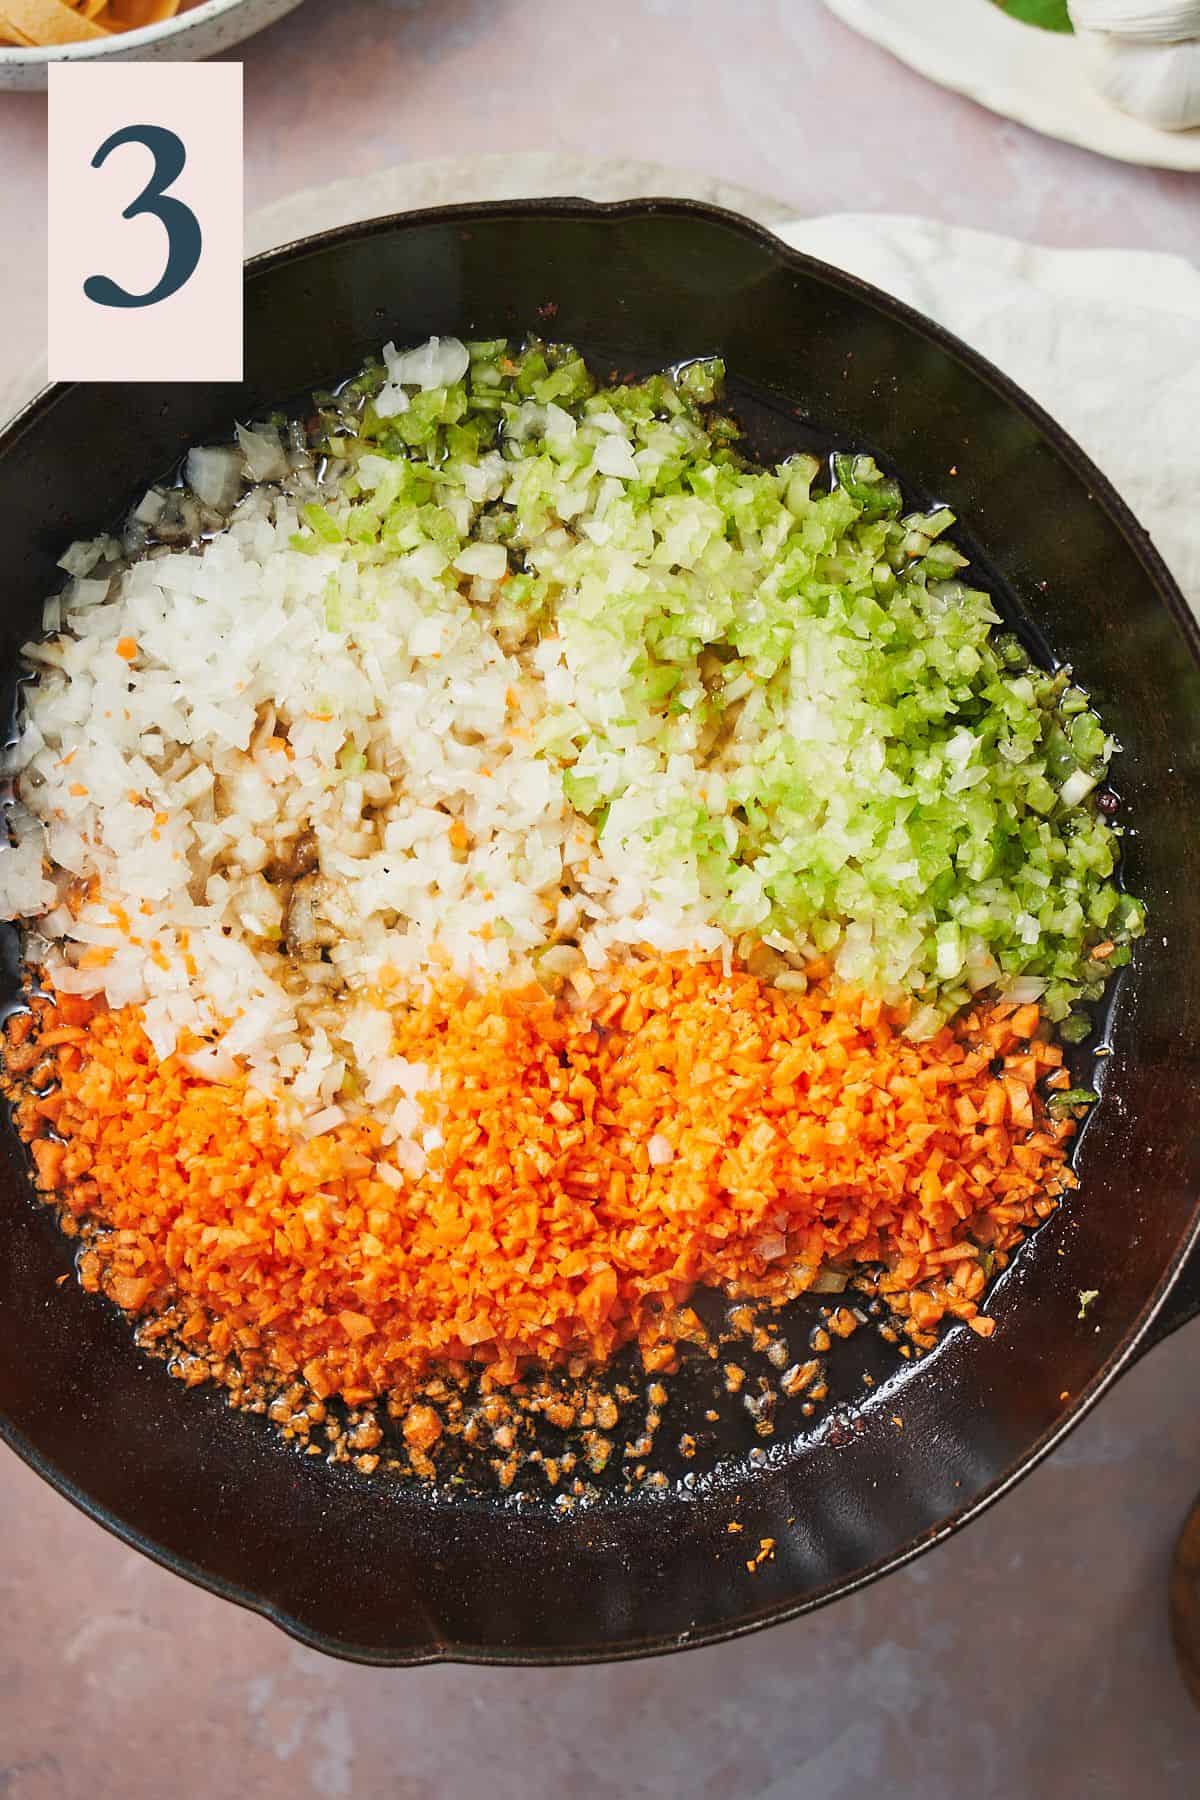 Raw carrots, celery, and and onions in cast iron skillet. 